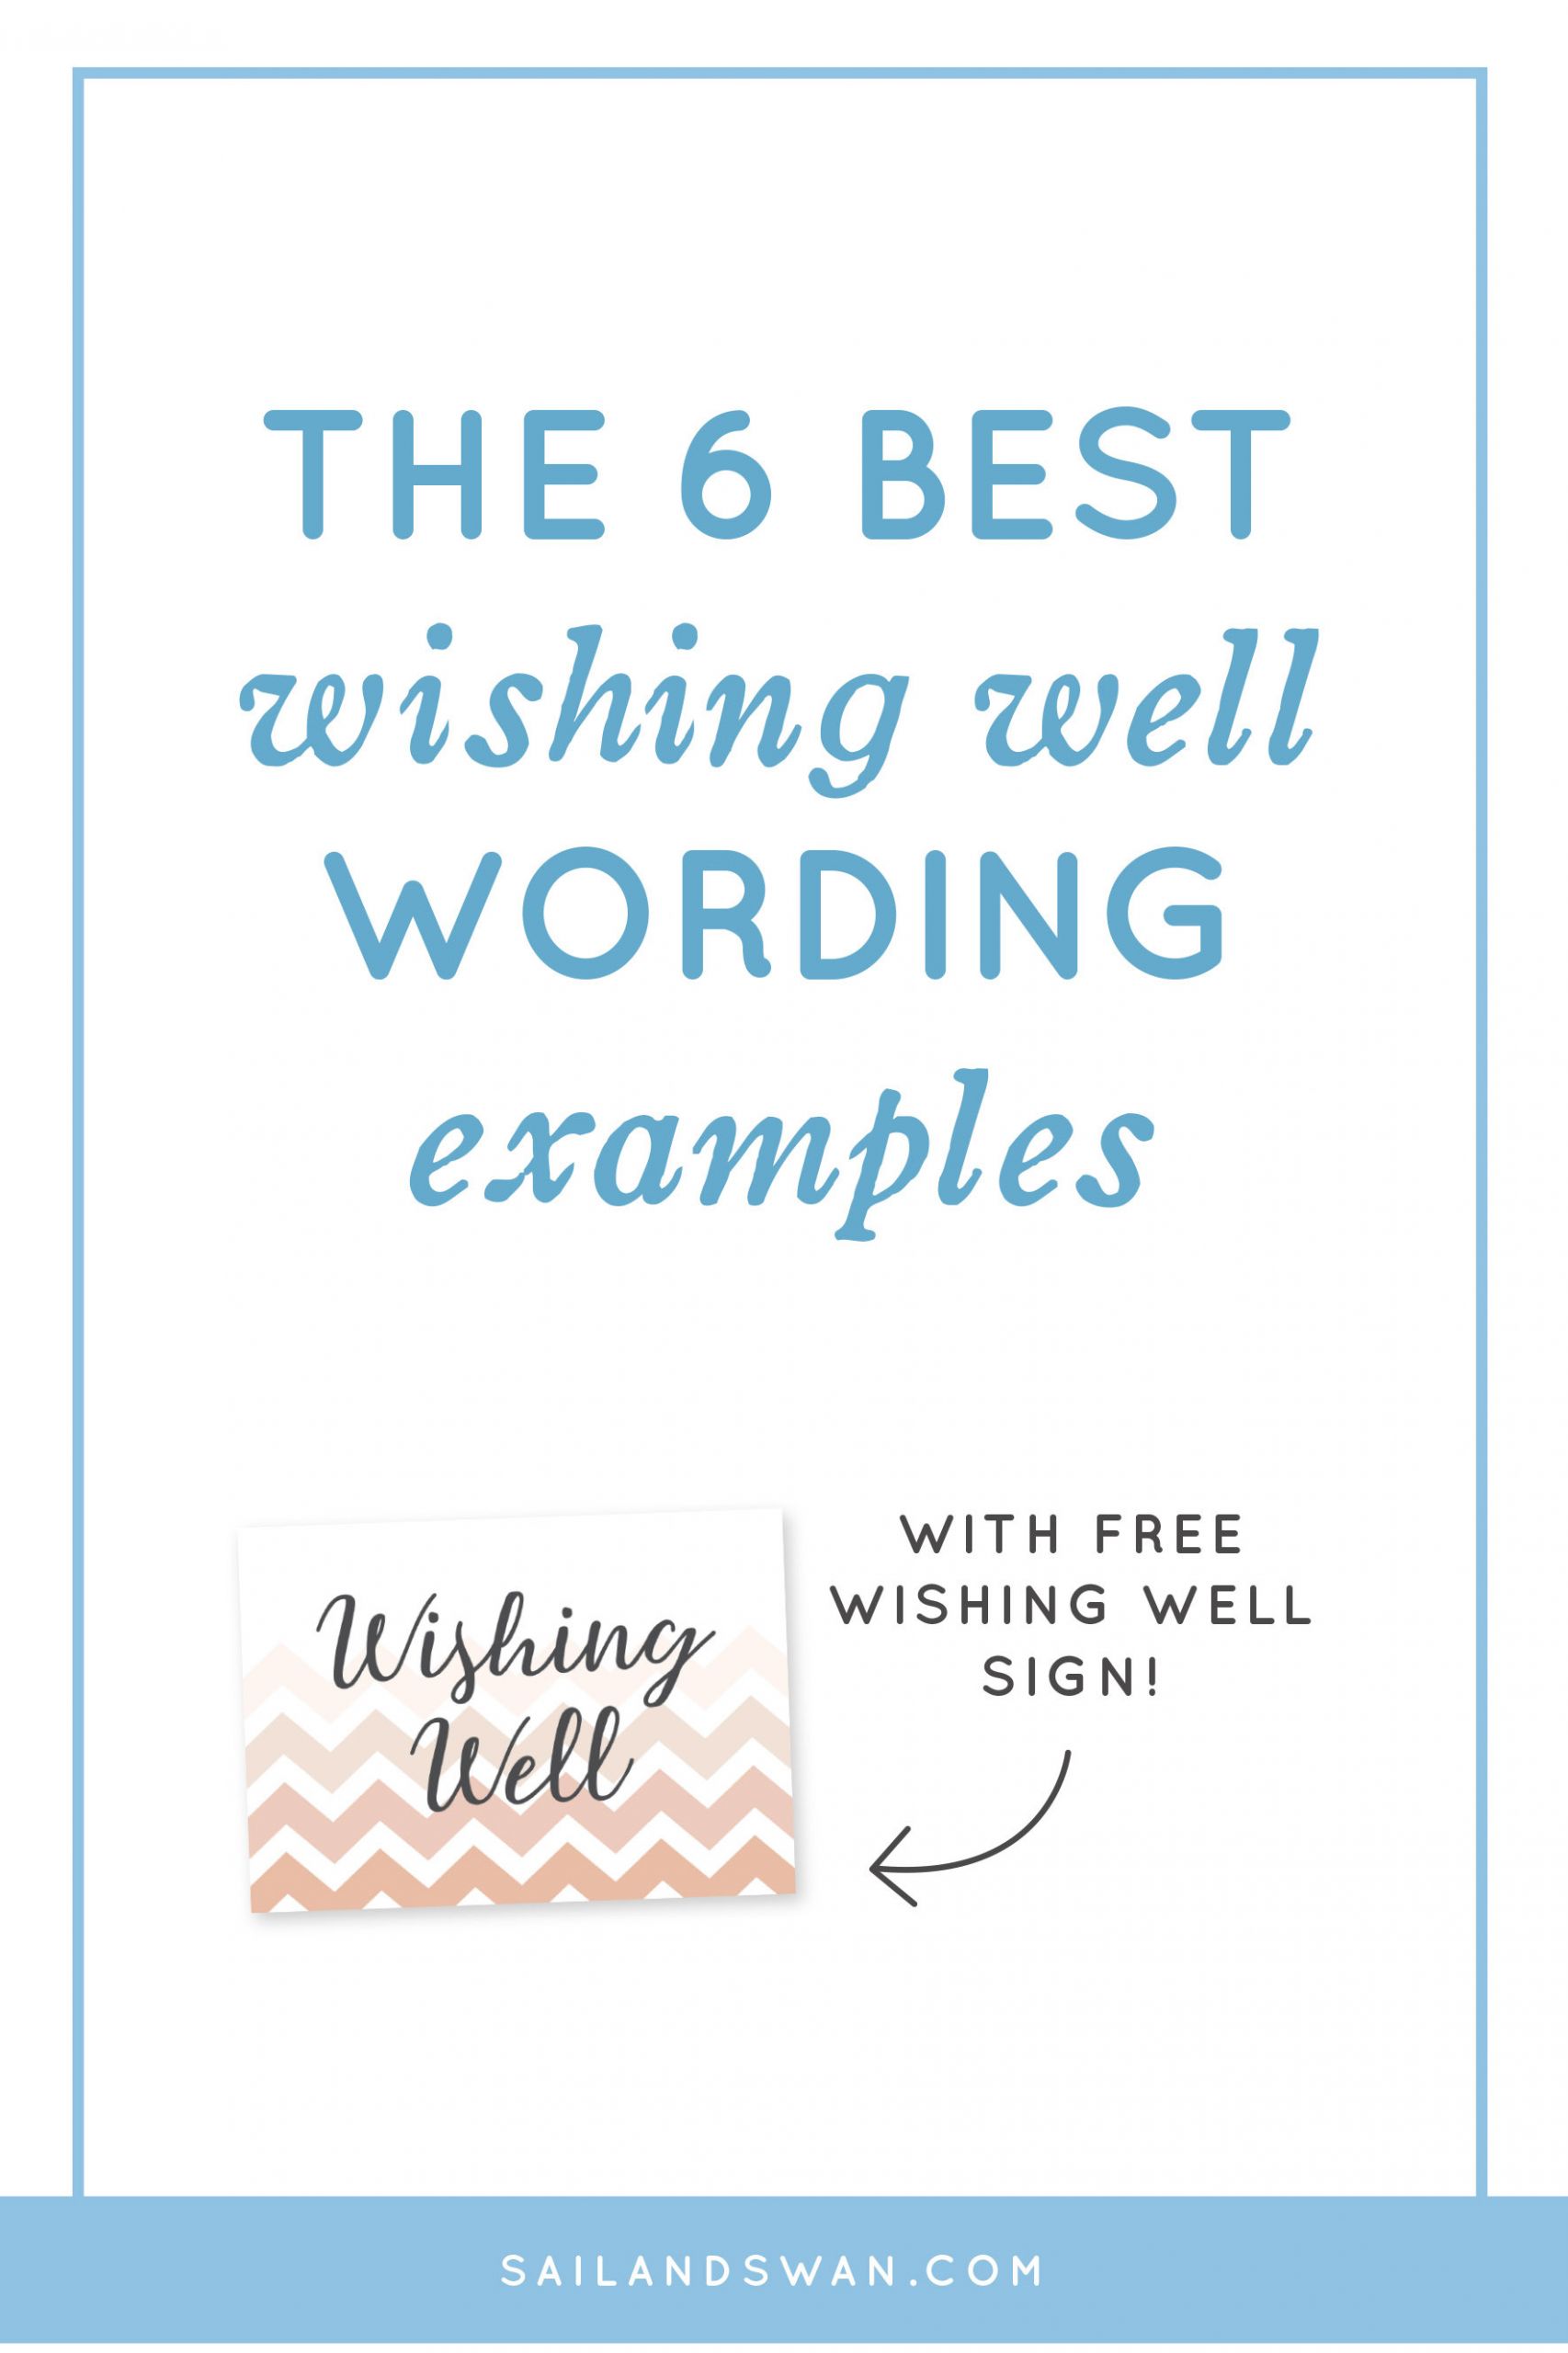 Baby Shower Wishing Well Quotes
 The 6 Best Wishing Well Wording Examples Wishing Well